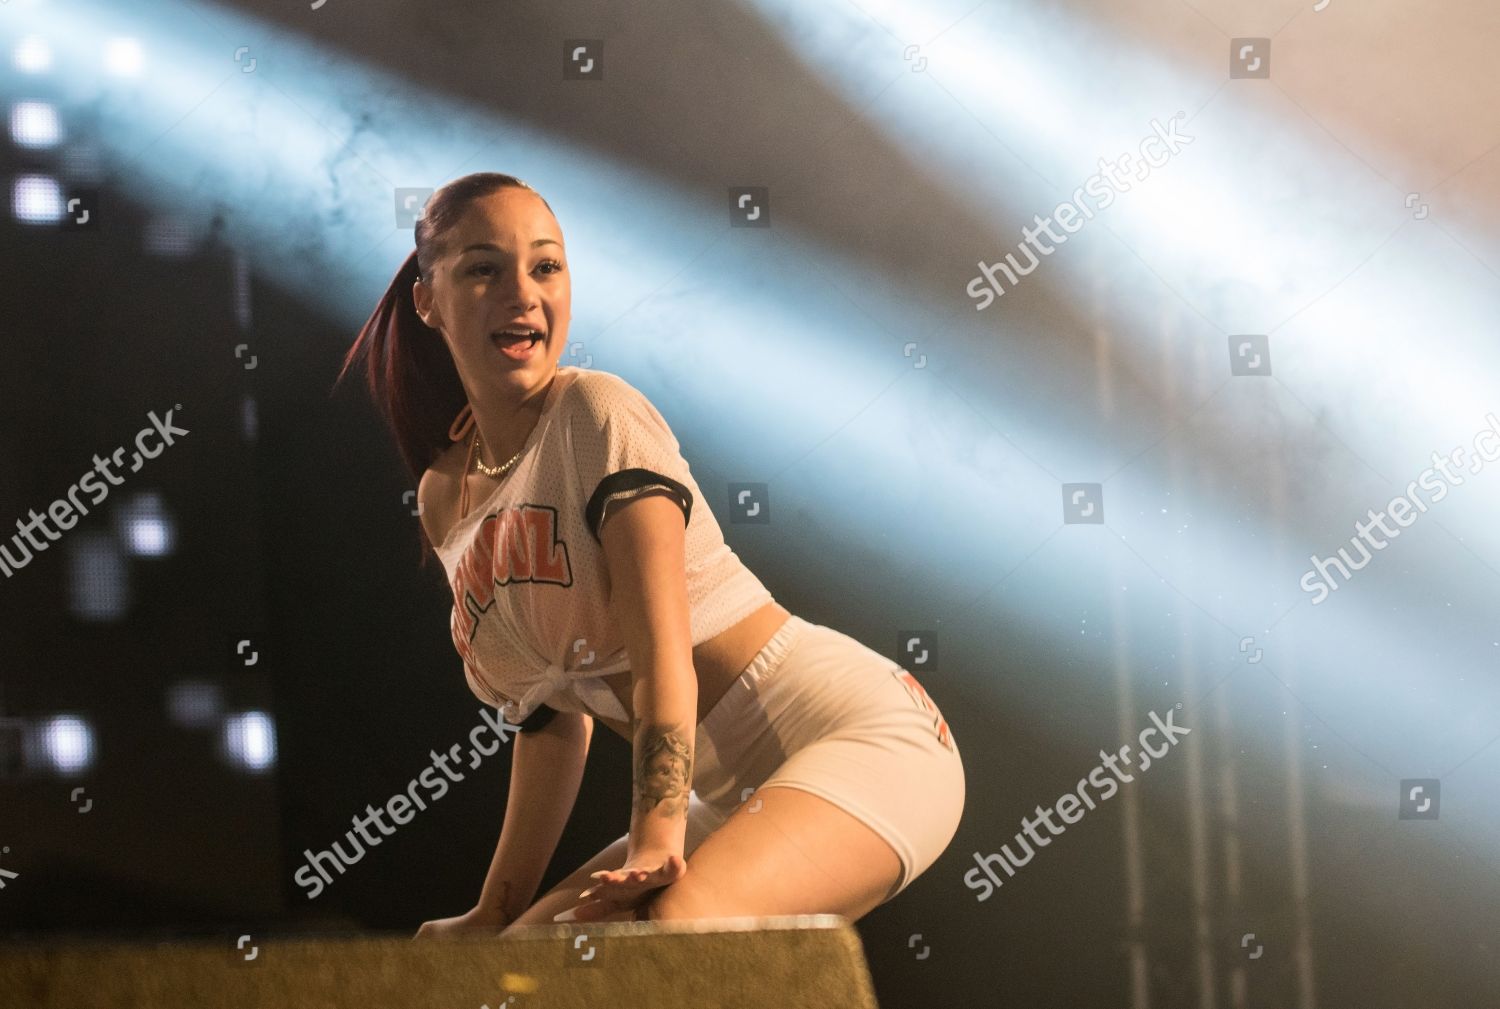 Bhad Bhabie Accused of 'Cultural Appropriation' Over Dark Makeup